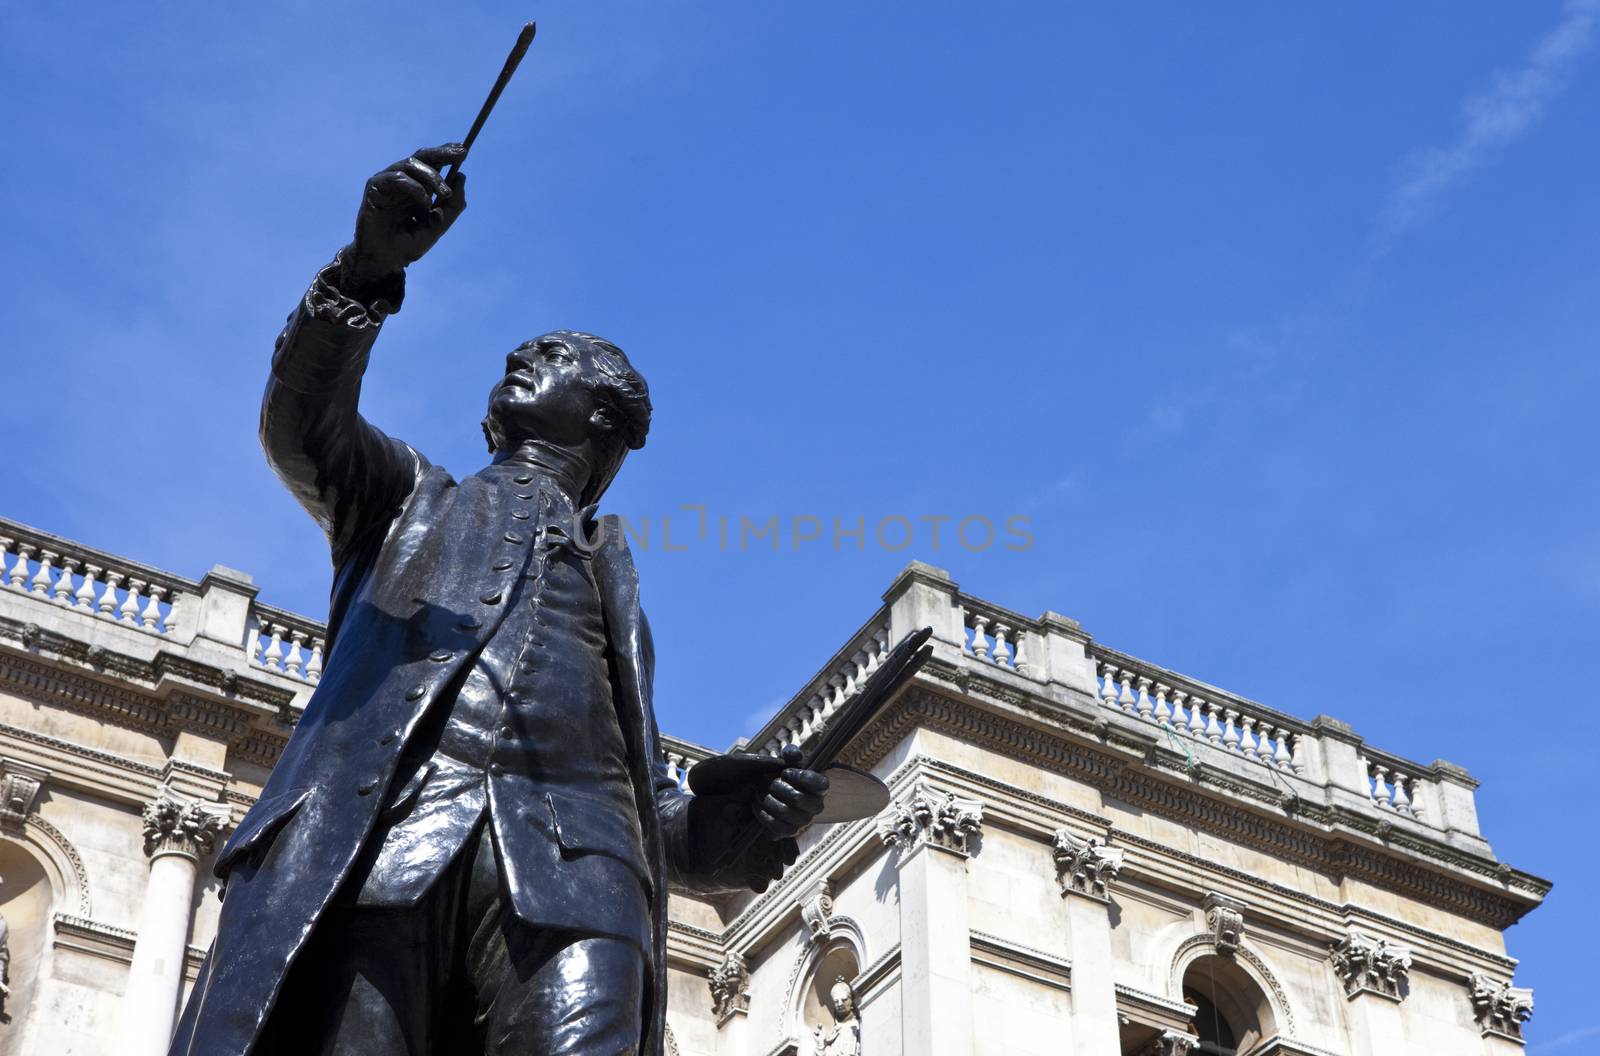 Statue of English painter Joshua Reynolds situated at Burlington House which houses the Royal Academy of Art in London.